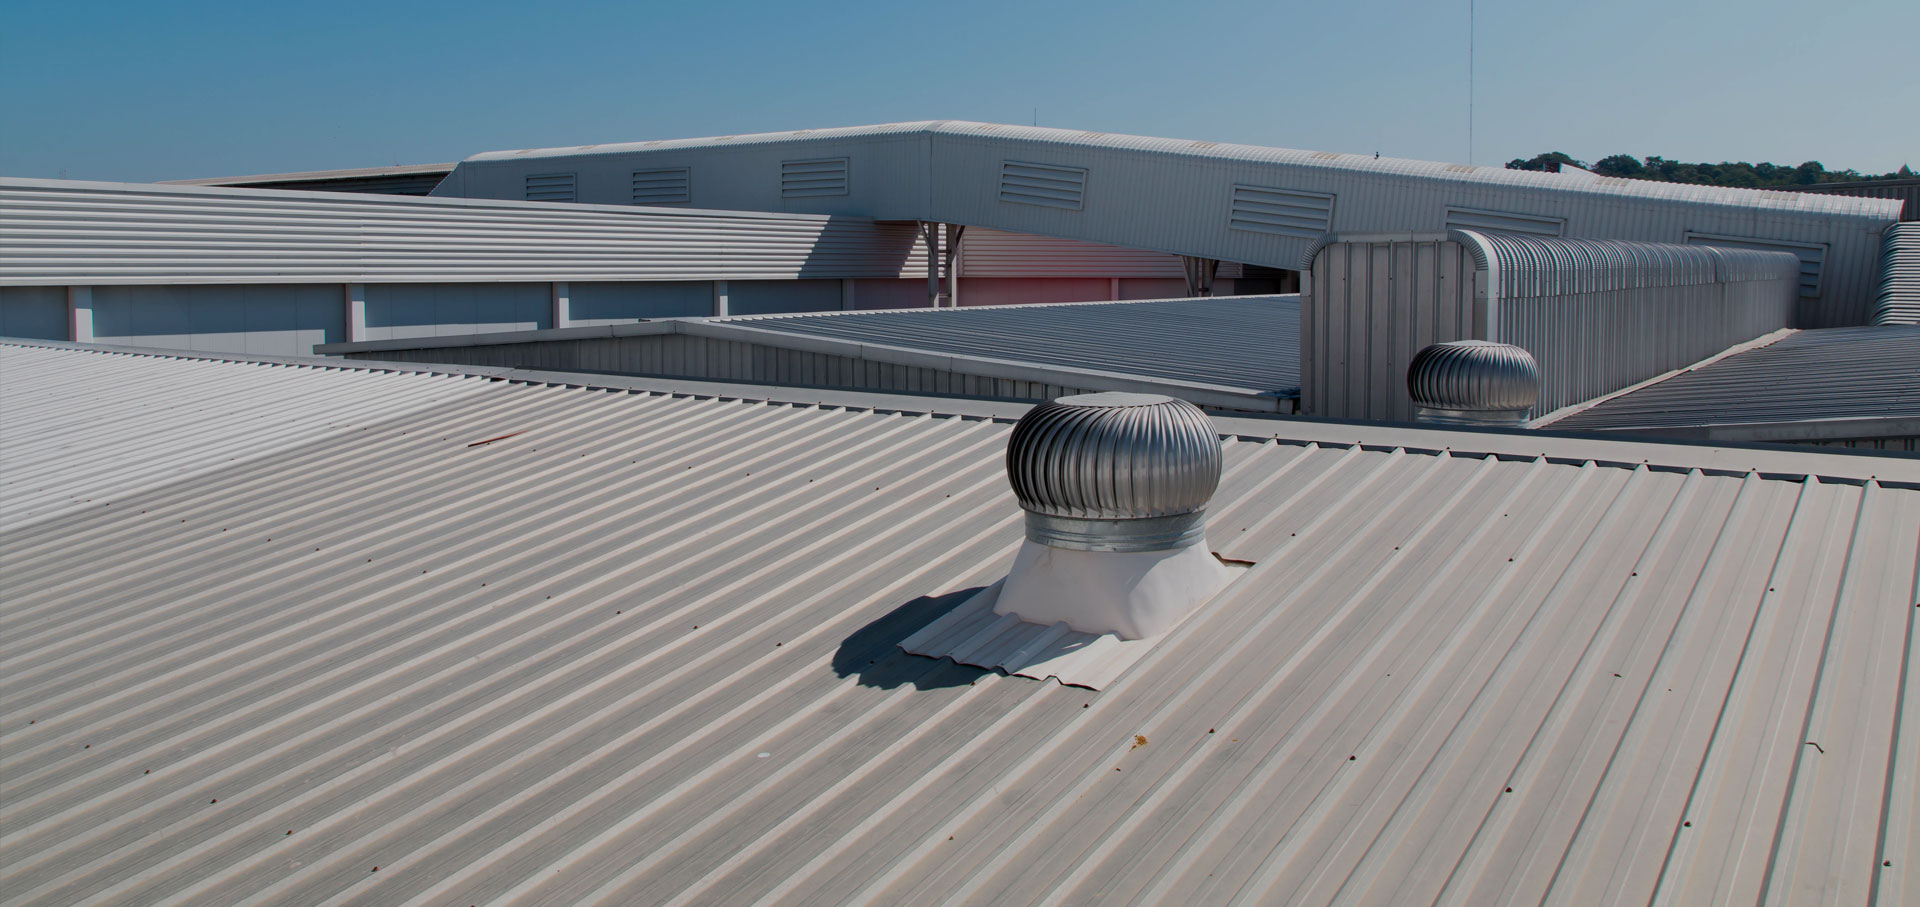 Advanced Commercial and Industrial Roofing Solutions to Keep Your Businesses Running